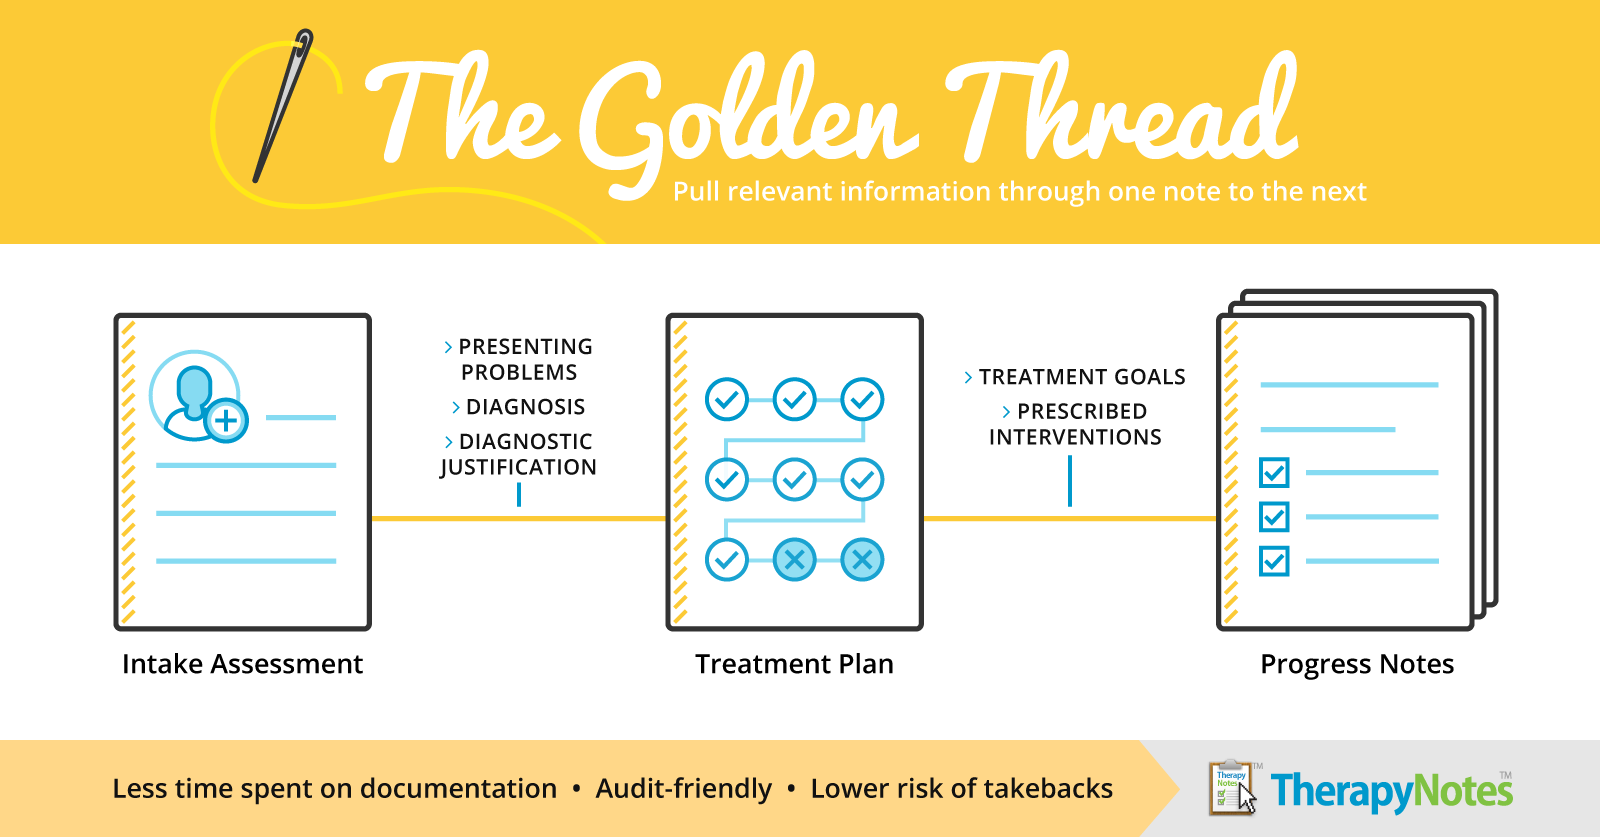 TherapyNotes - The Golden Thread and Rich Documentation